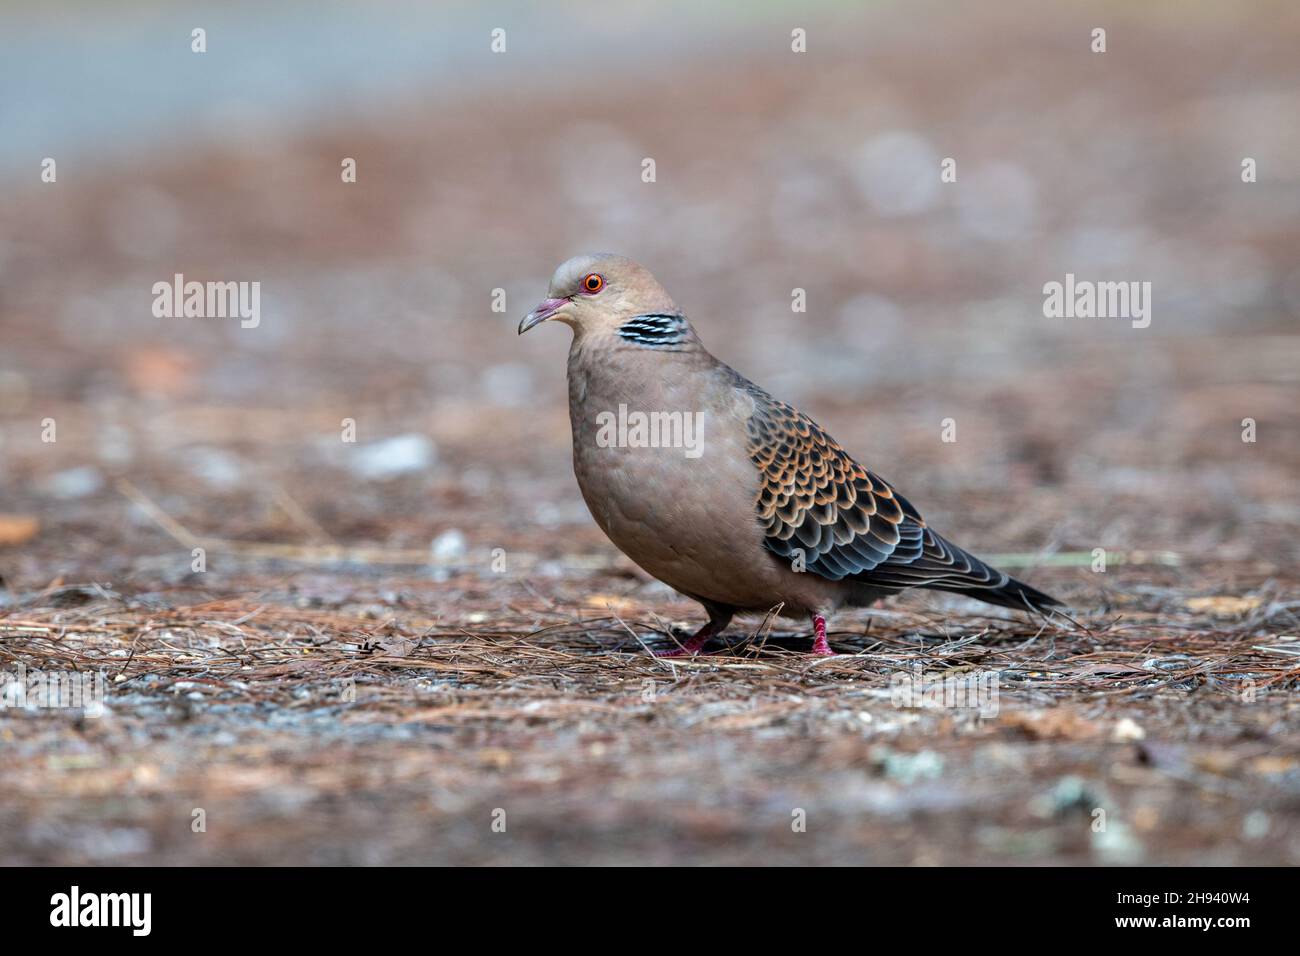 The Oriental turtle dove or rufous turtle dove (Streptopelia orientalis) is a member of the bird family Columbidae. The species has a wide native dist Stock Photo